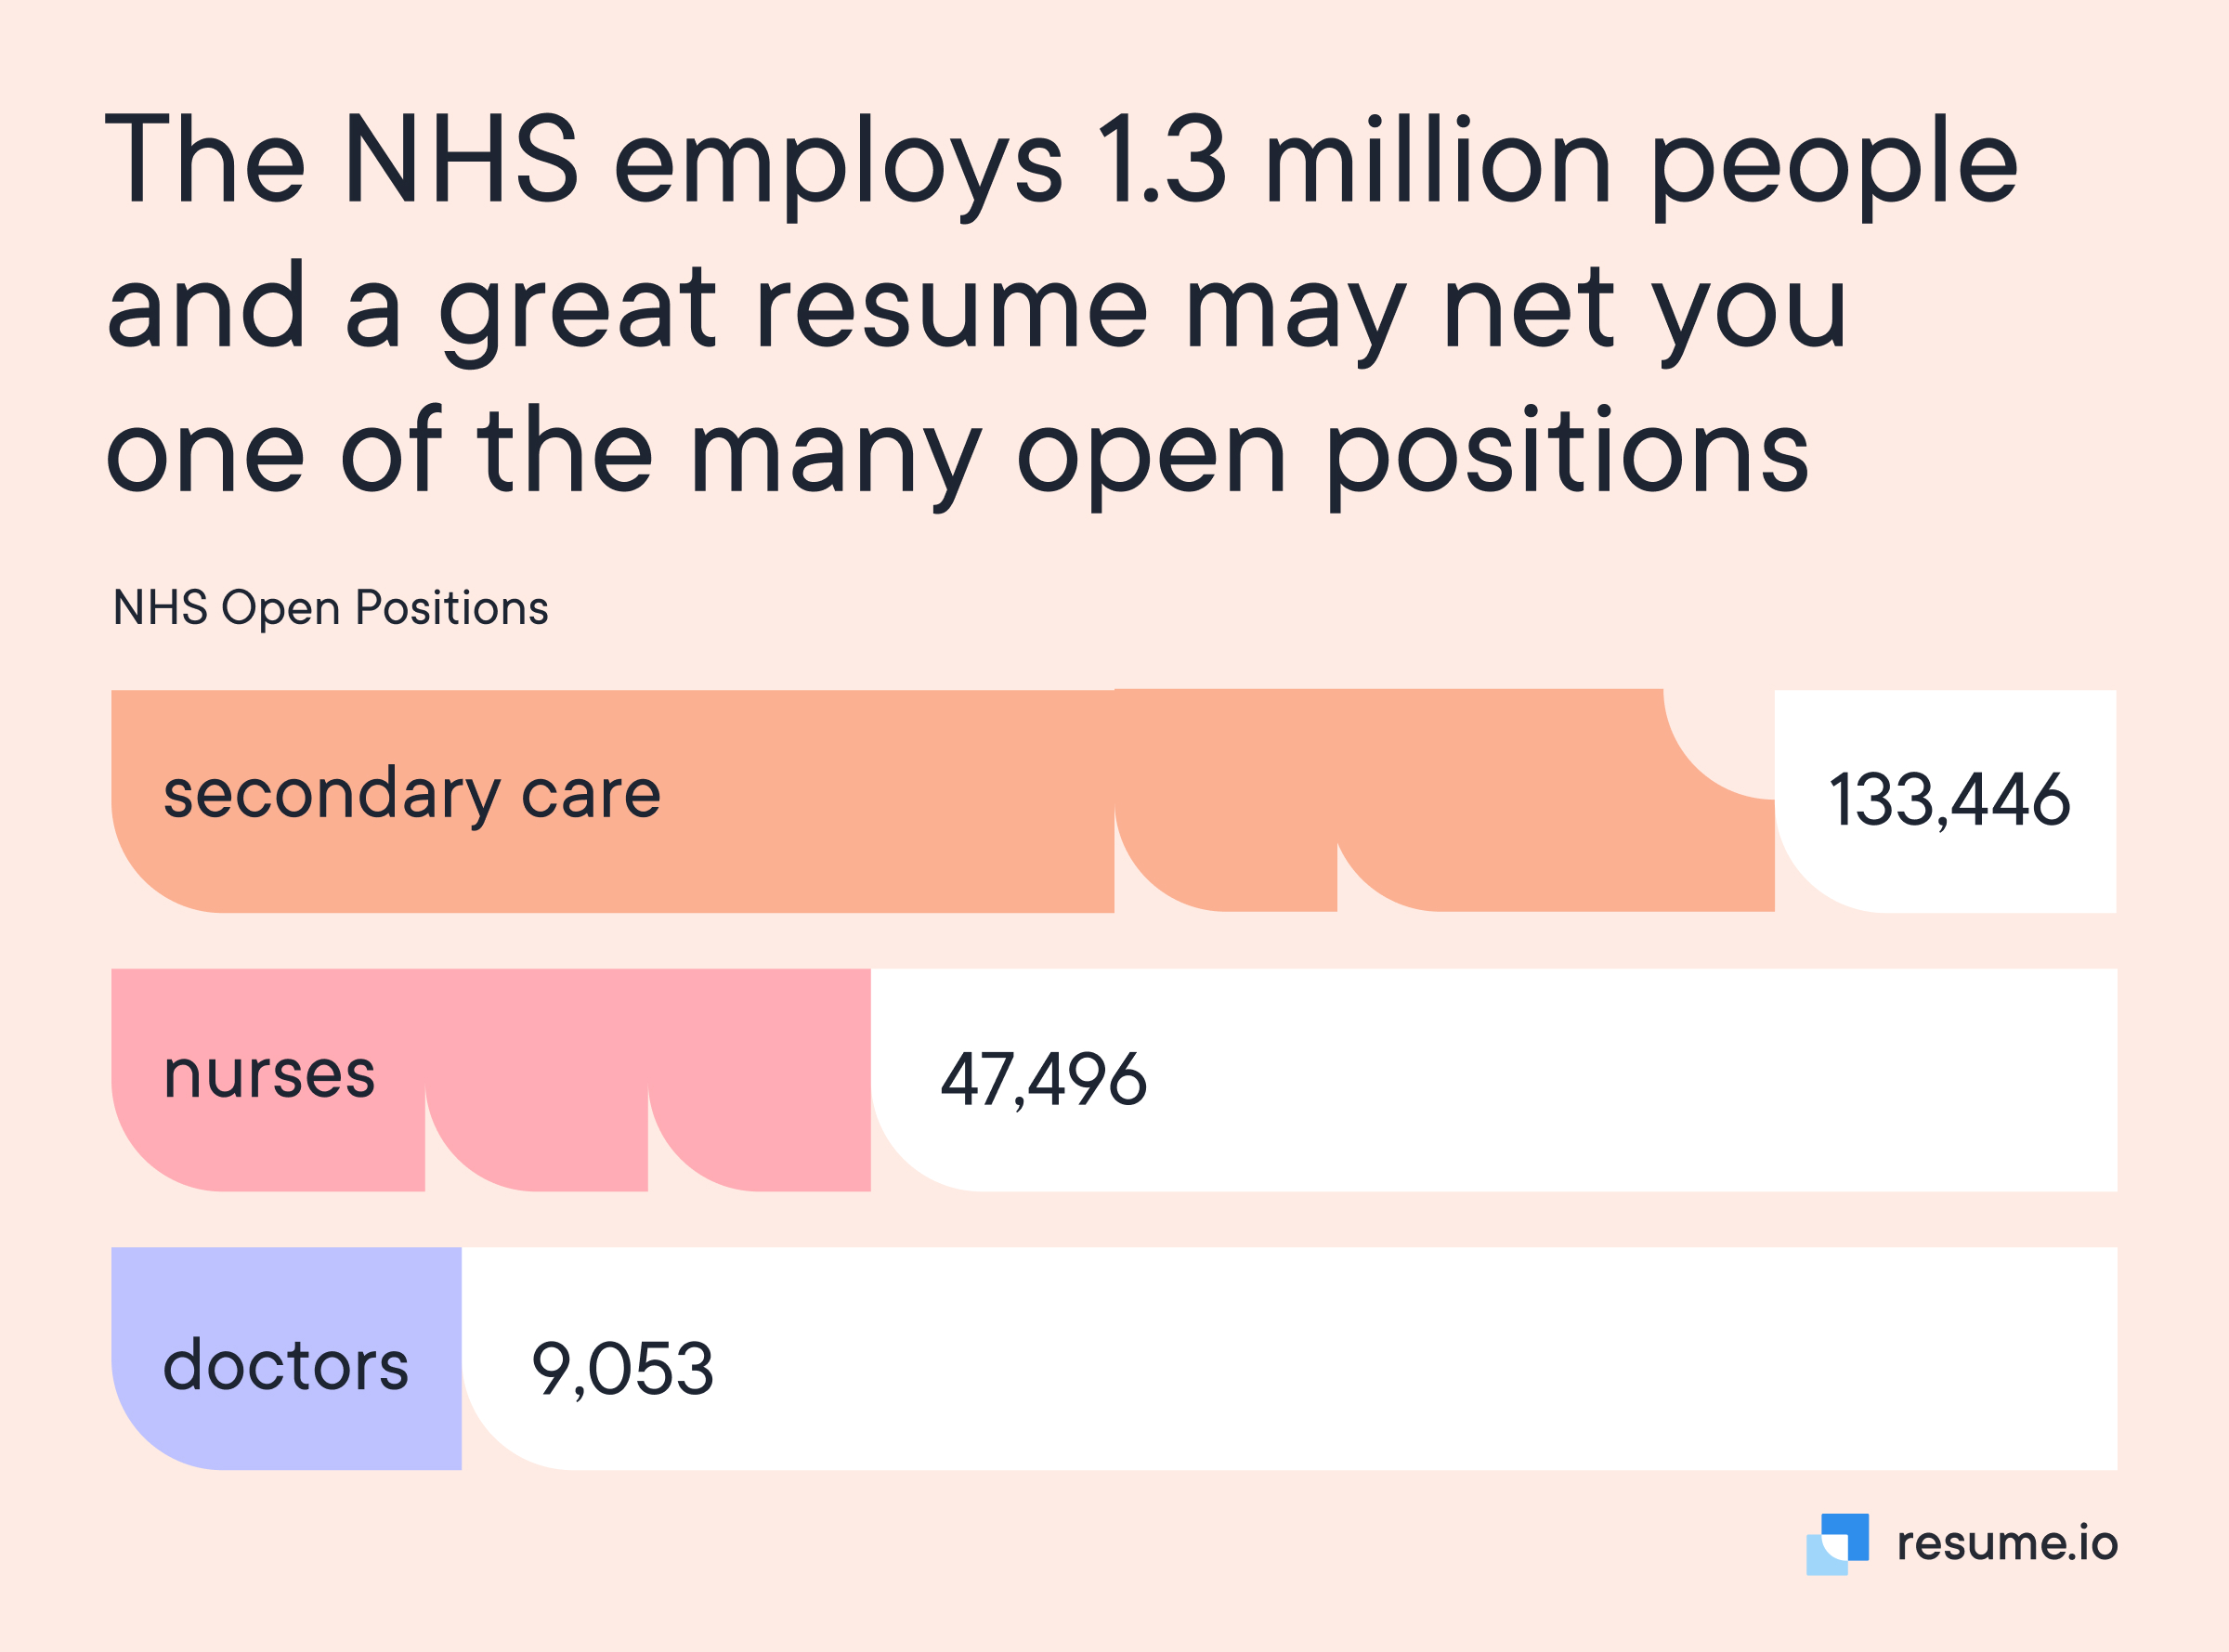 The NHS employs 1.3 million people and a great resume may net you one of the many open positions. 